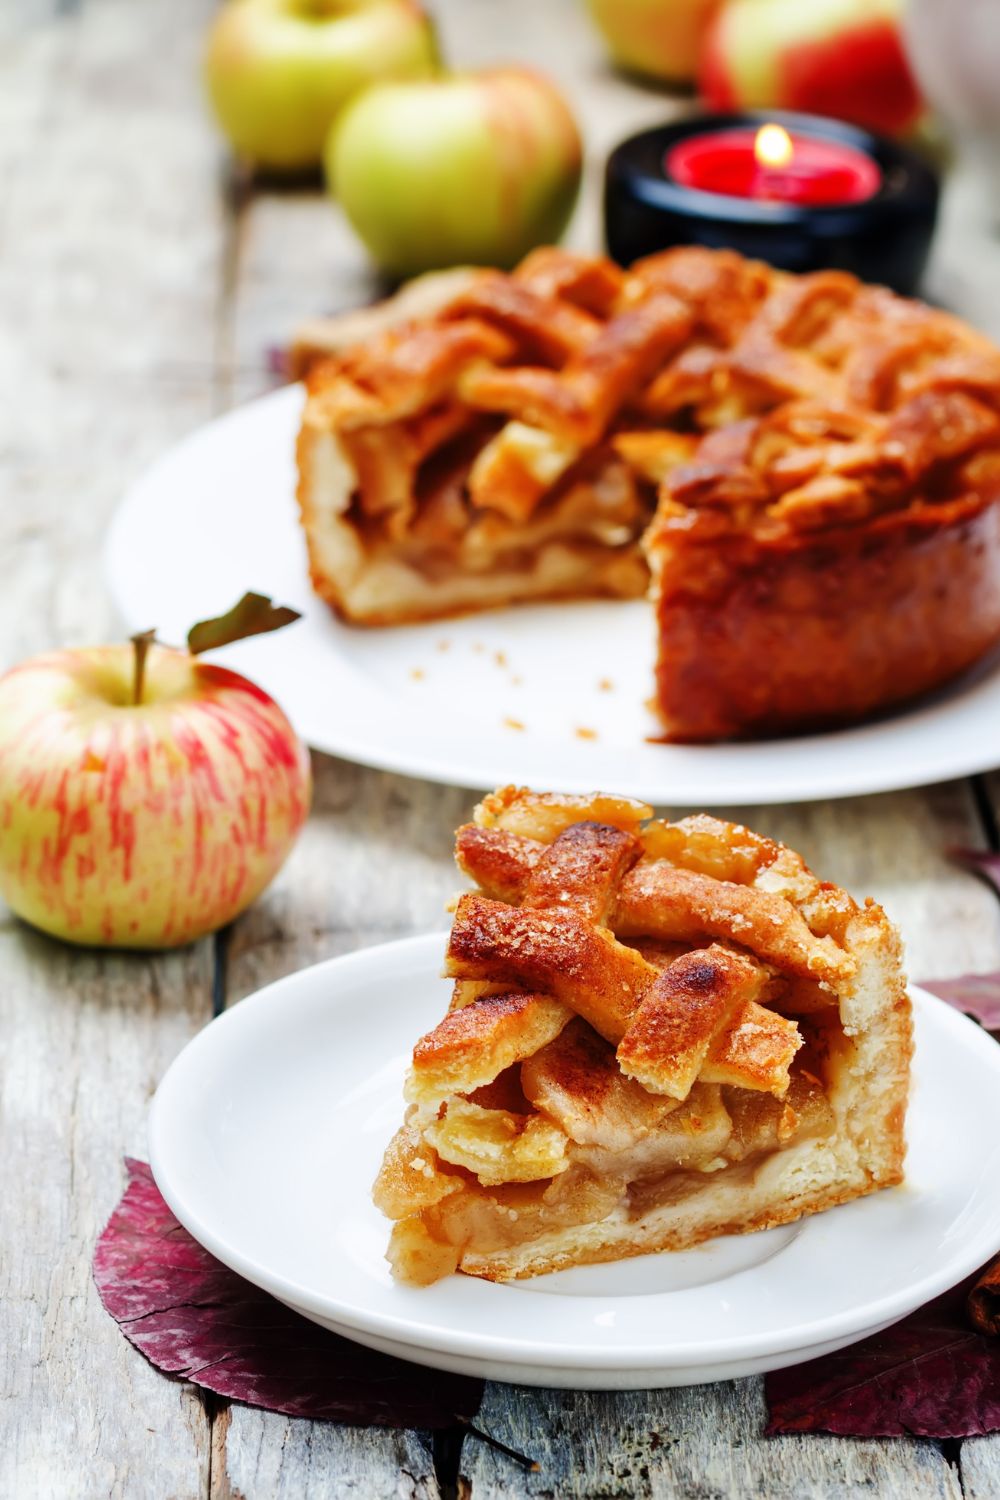 a slice of apple pie on a plate with the rest of the pie in the background